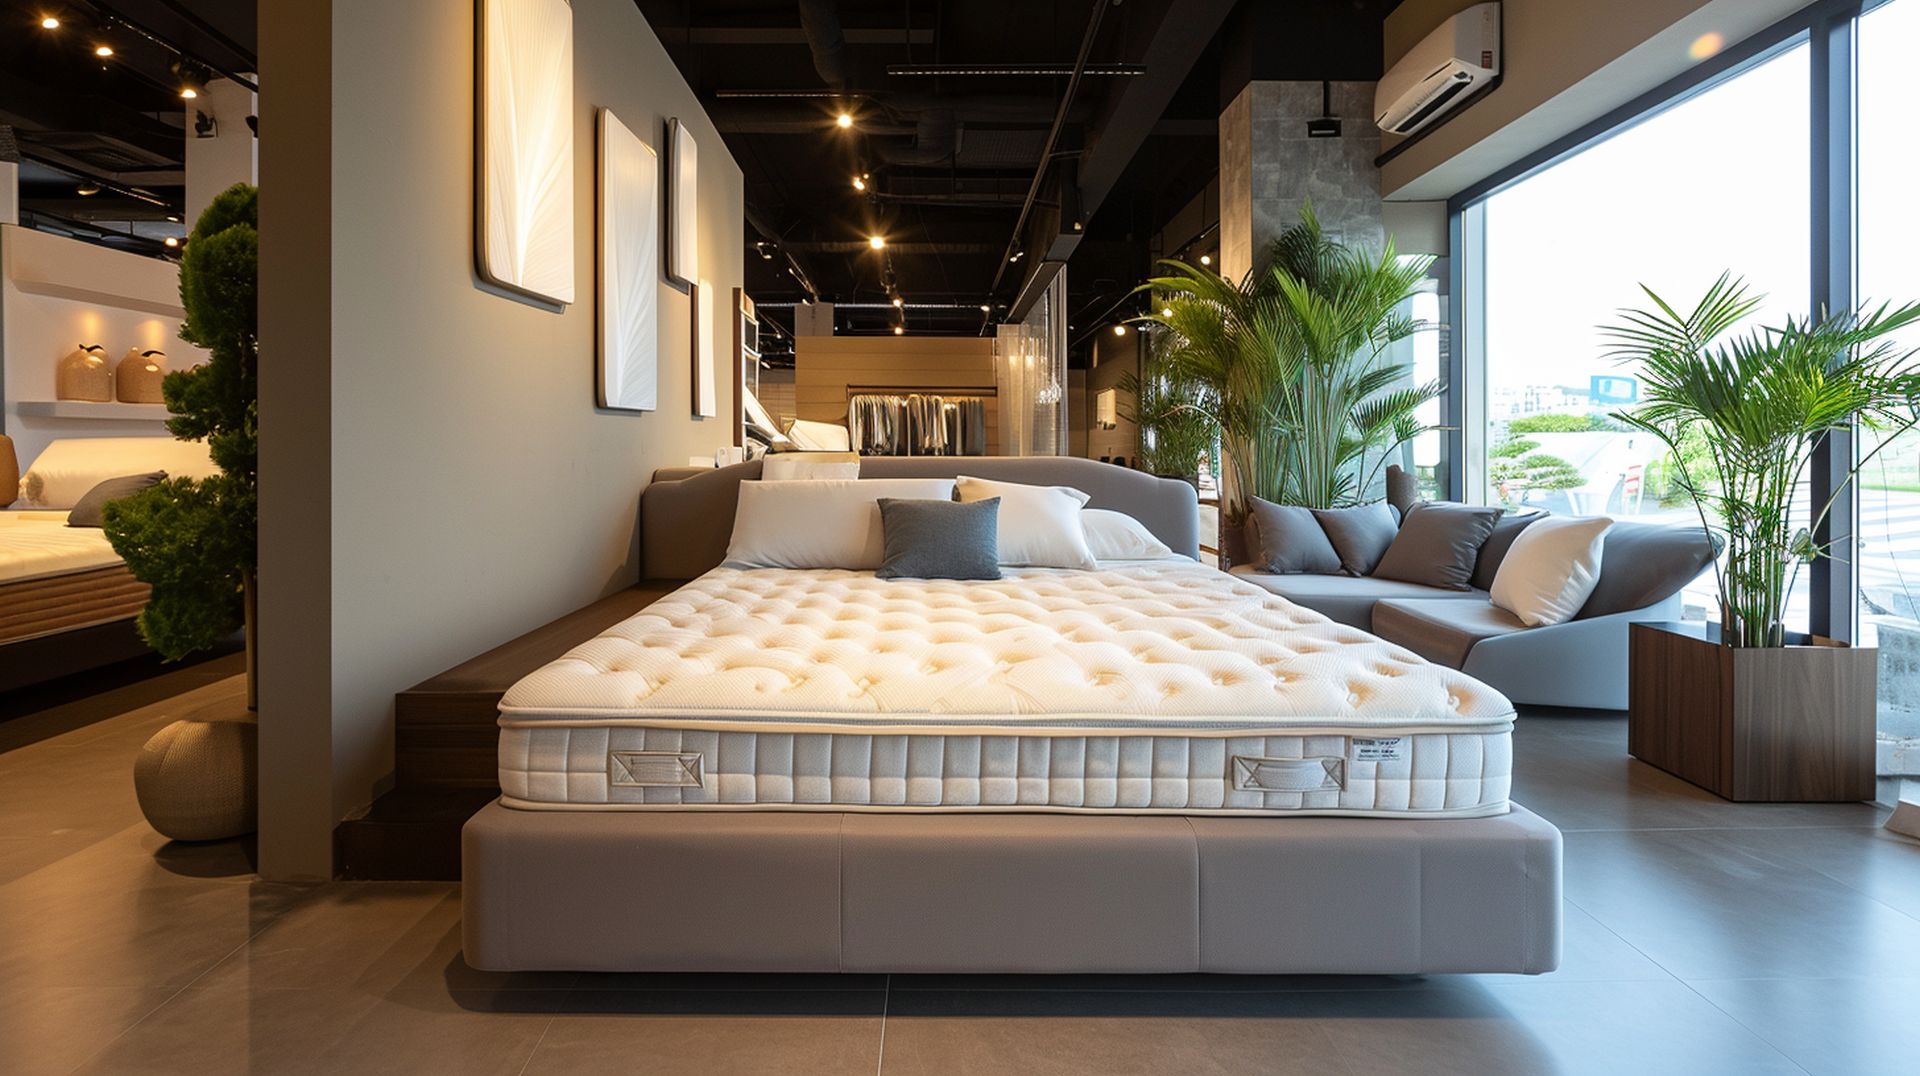 Types of mattresses at mattress dealers in Lakeville, MN